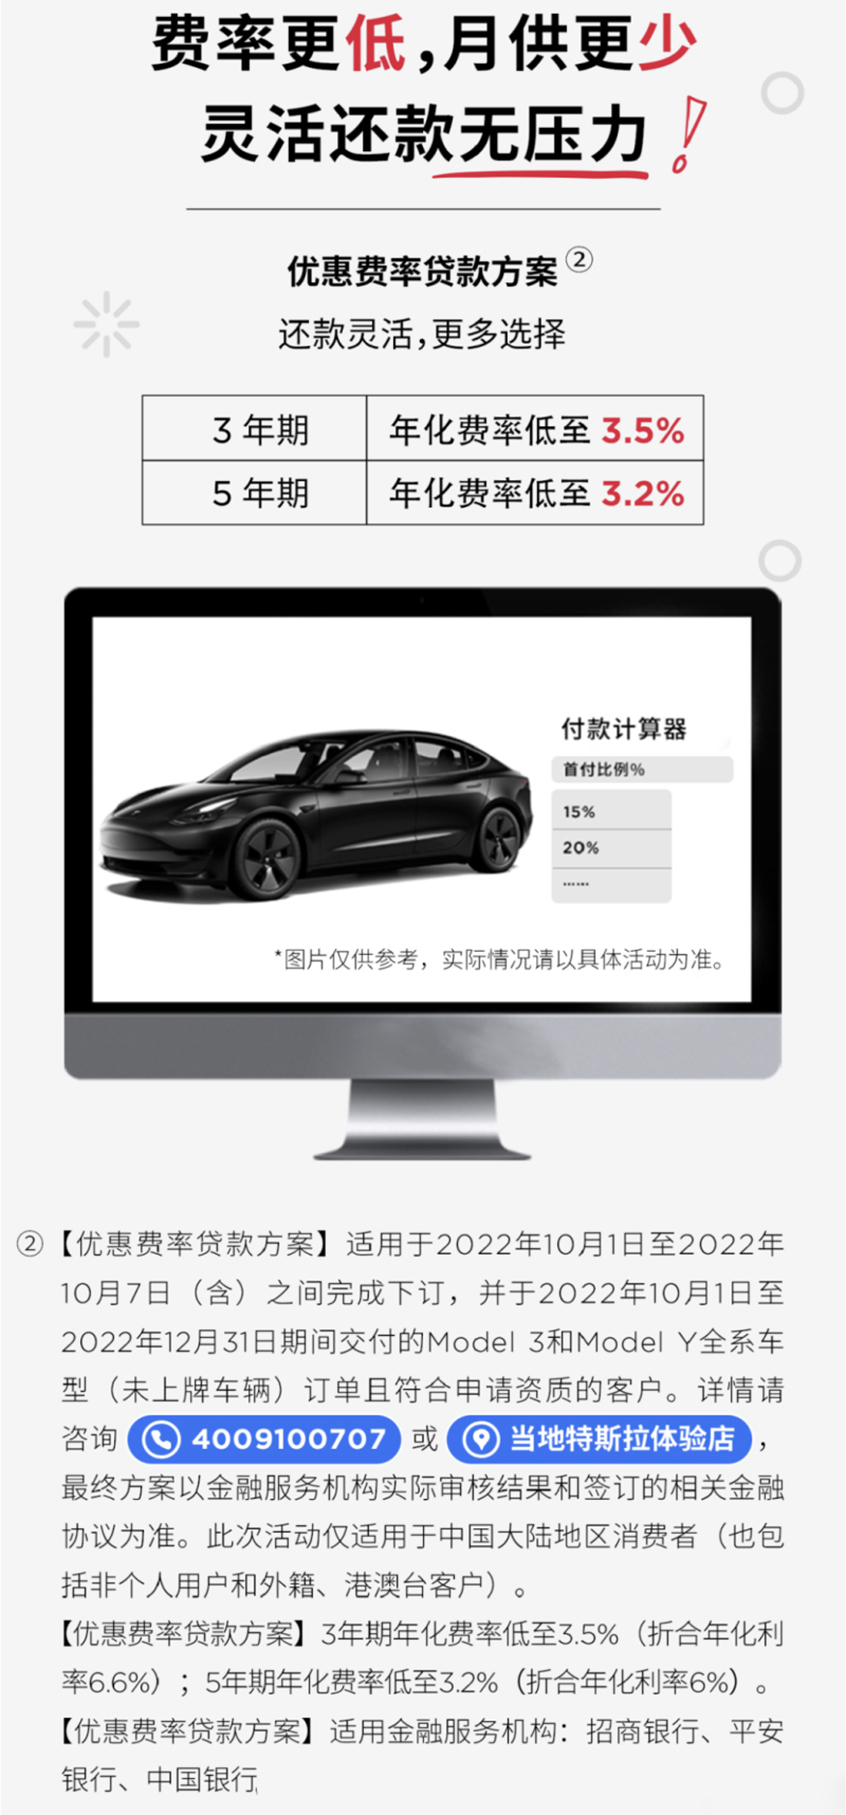 Insurance subsidies and other Tesla China's latest car purchase policies